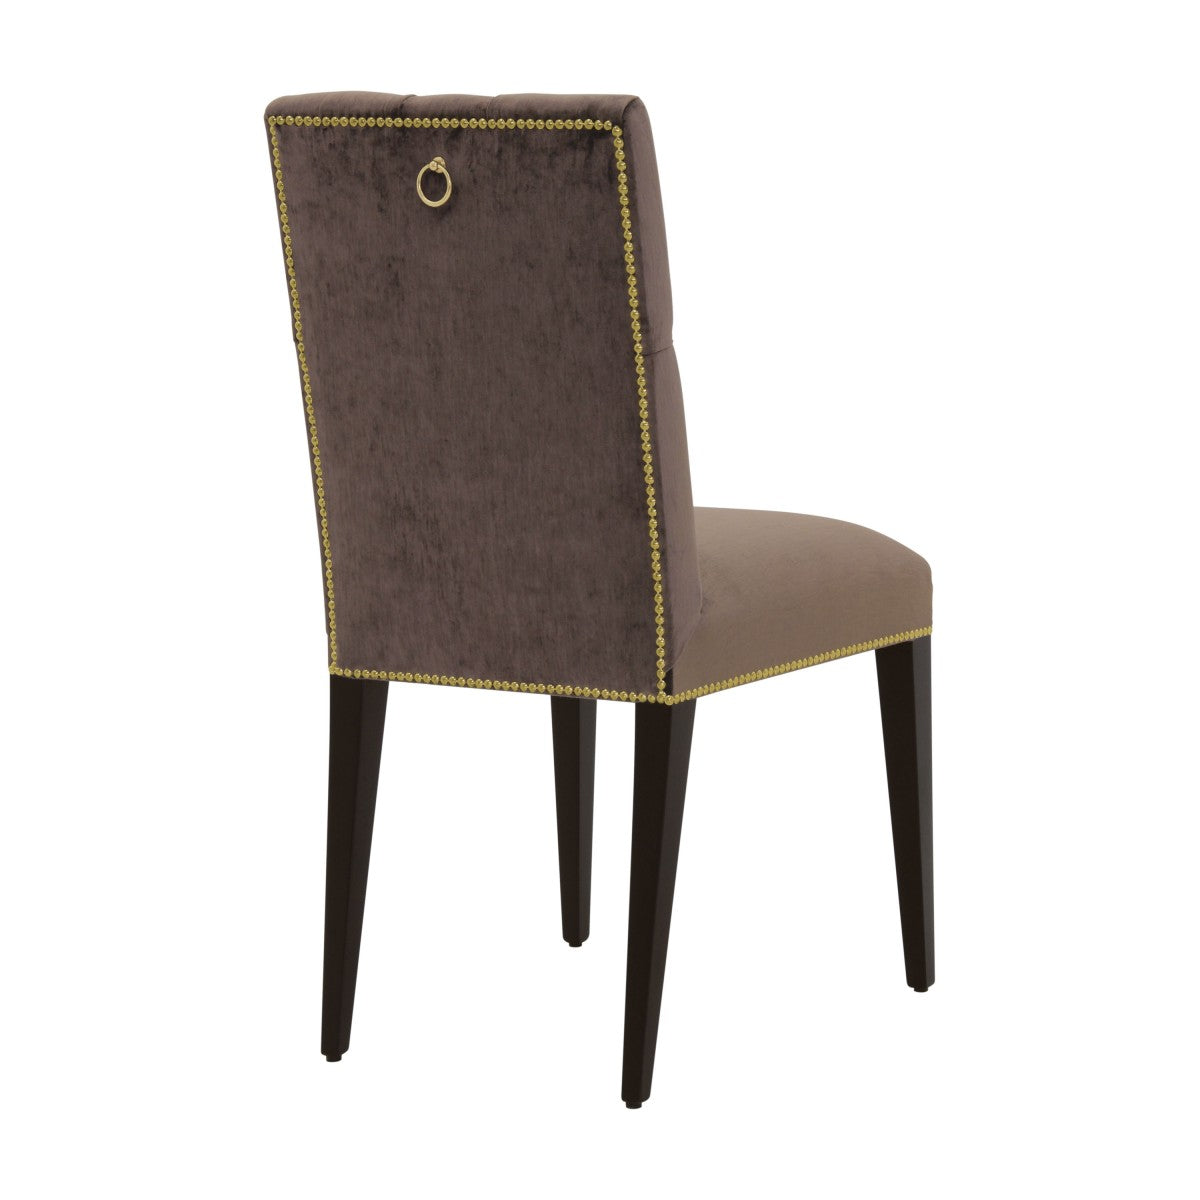 Arianna Bespoke Upholstered Modern Contemporary Dining Chair MS324S Custom Made To Order